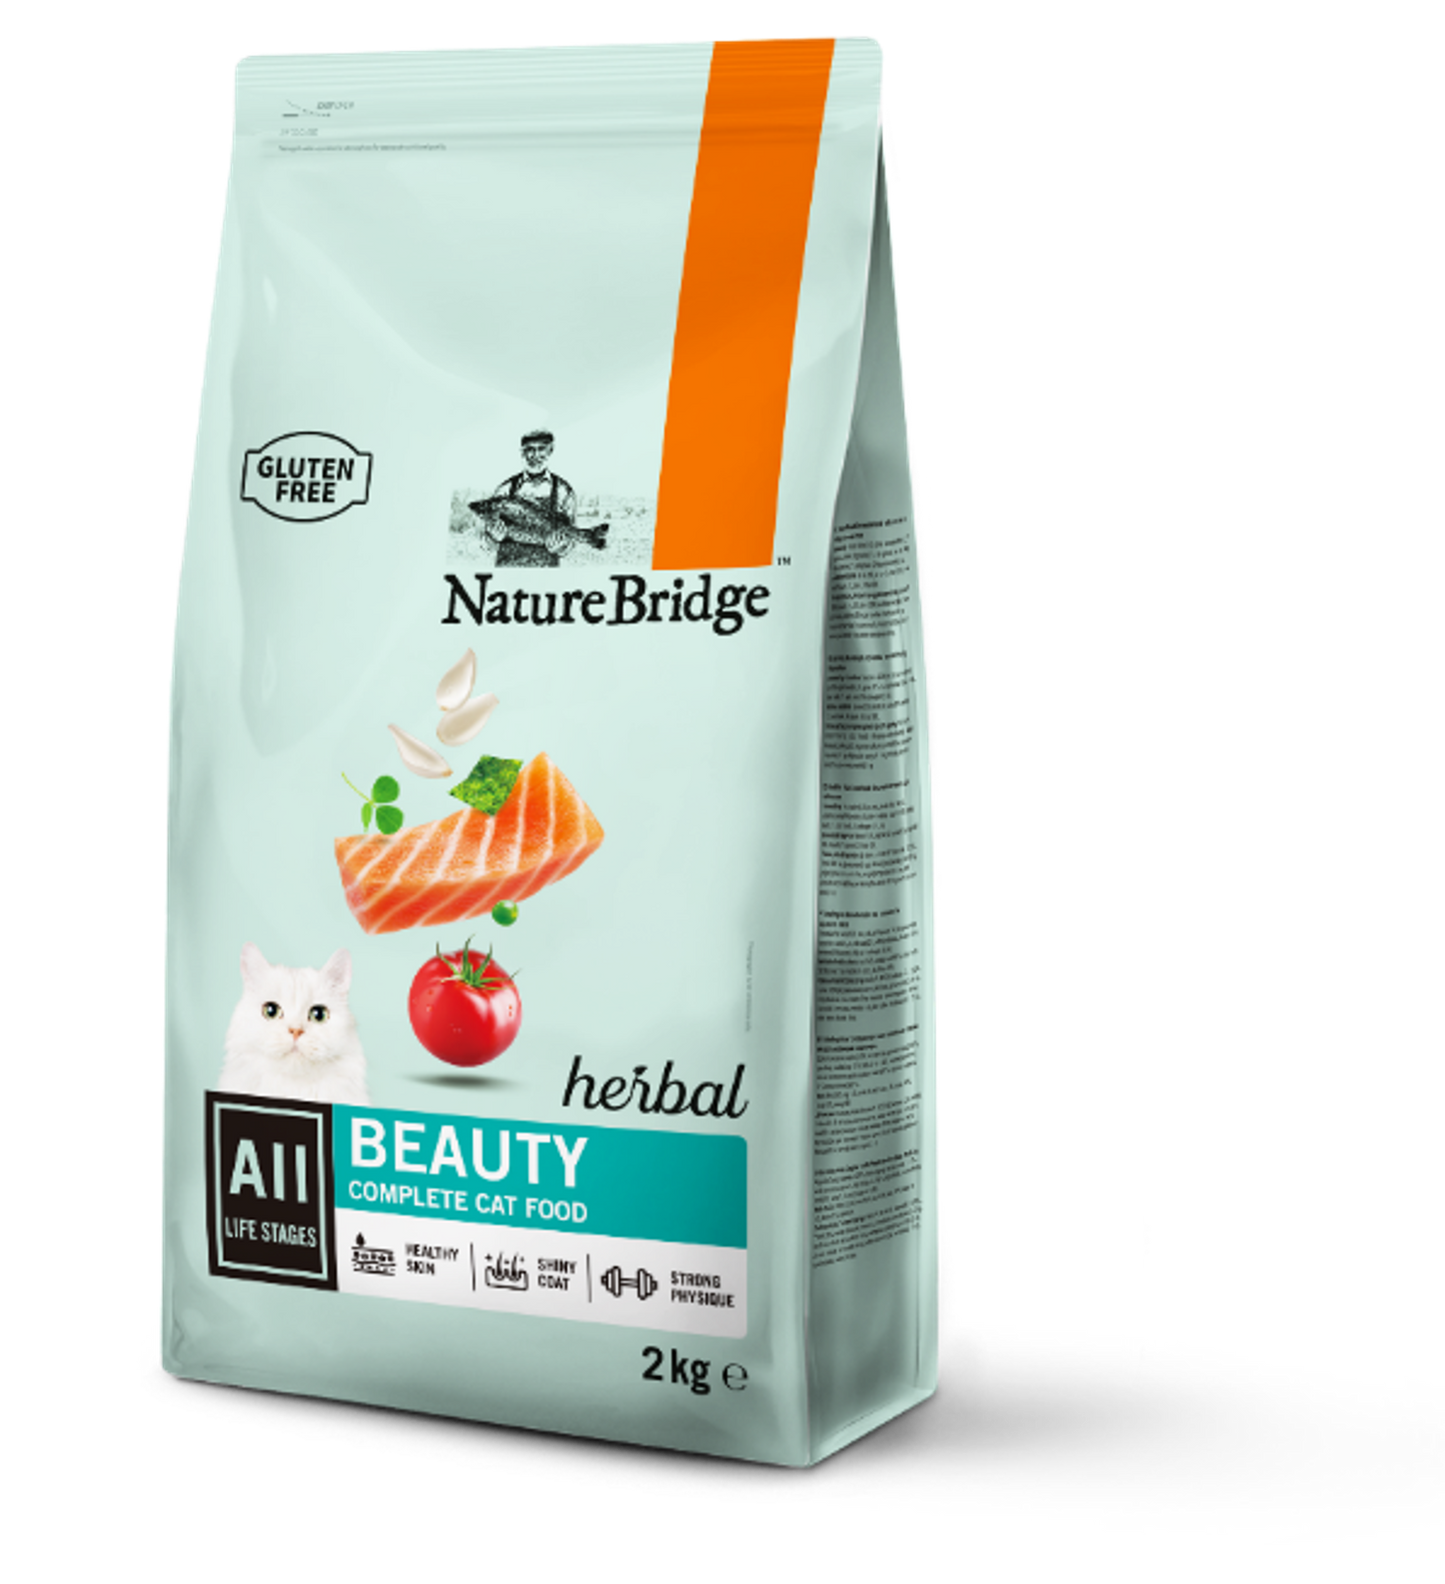 Hypoallergenic Dry Cat Food and Biscuits- Beauty Cat